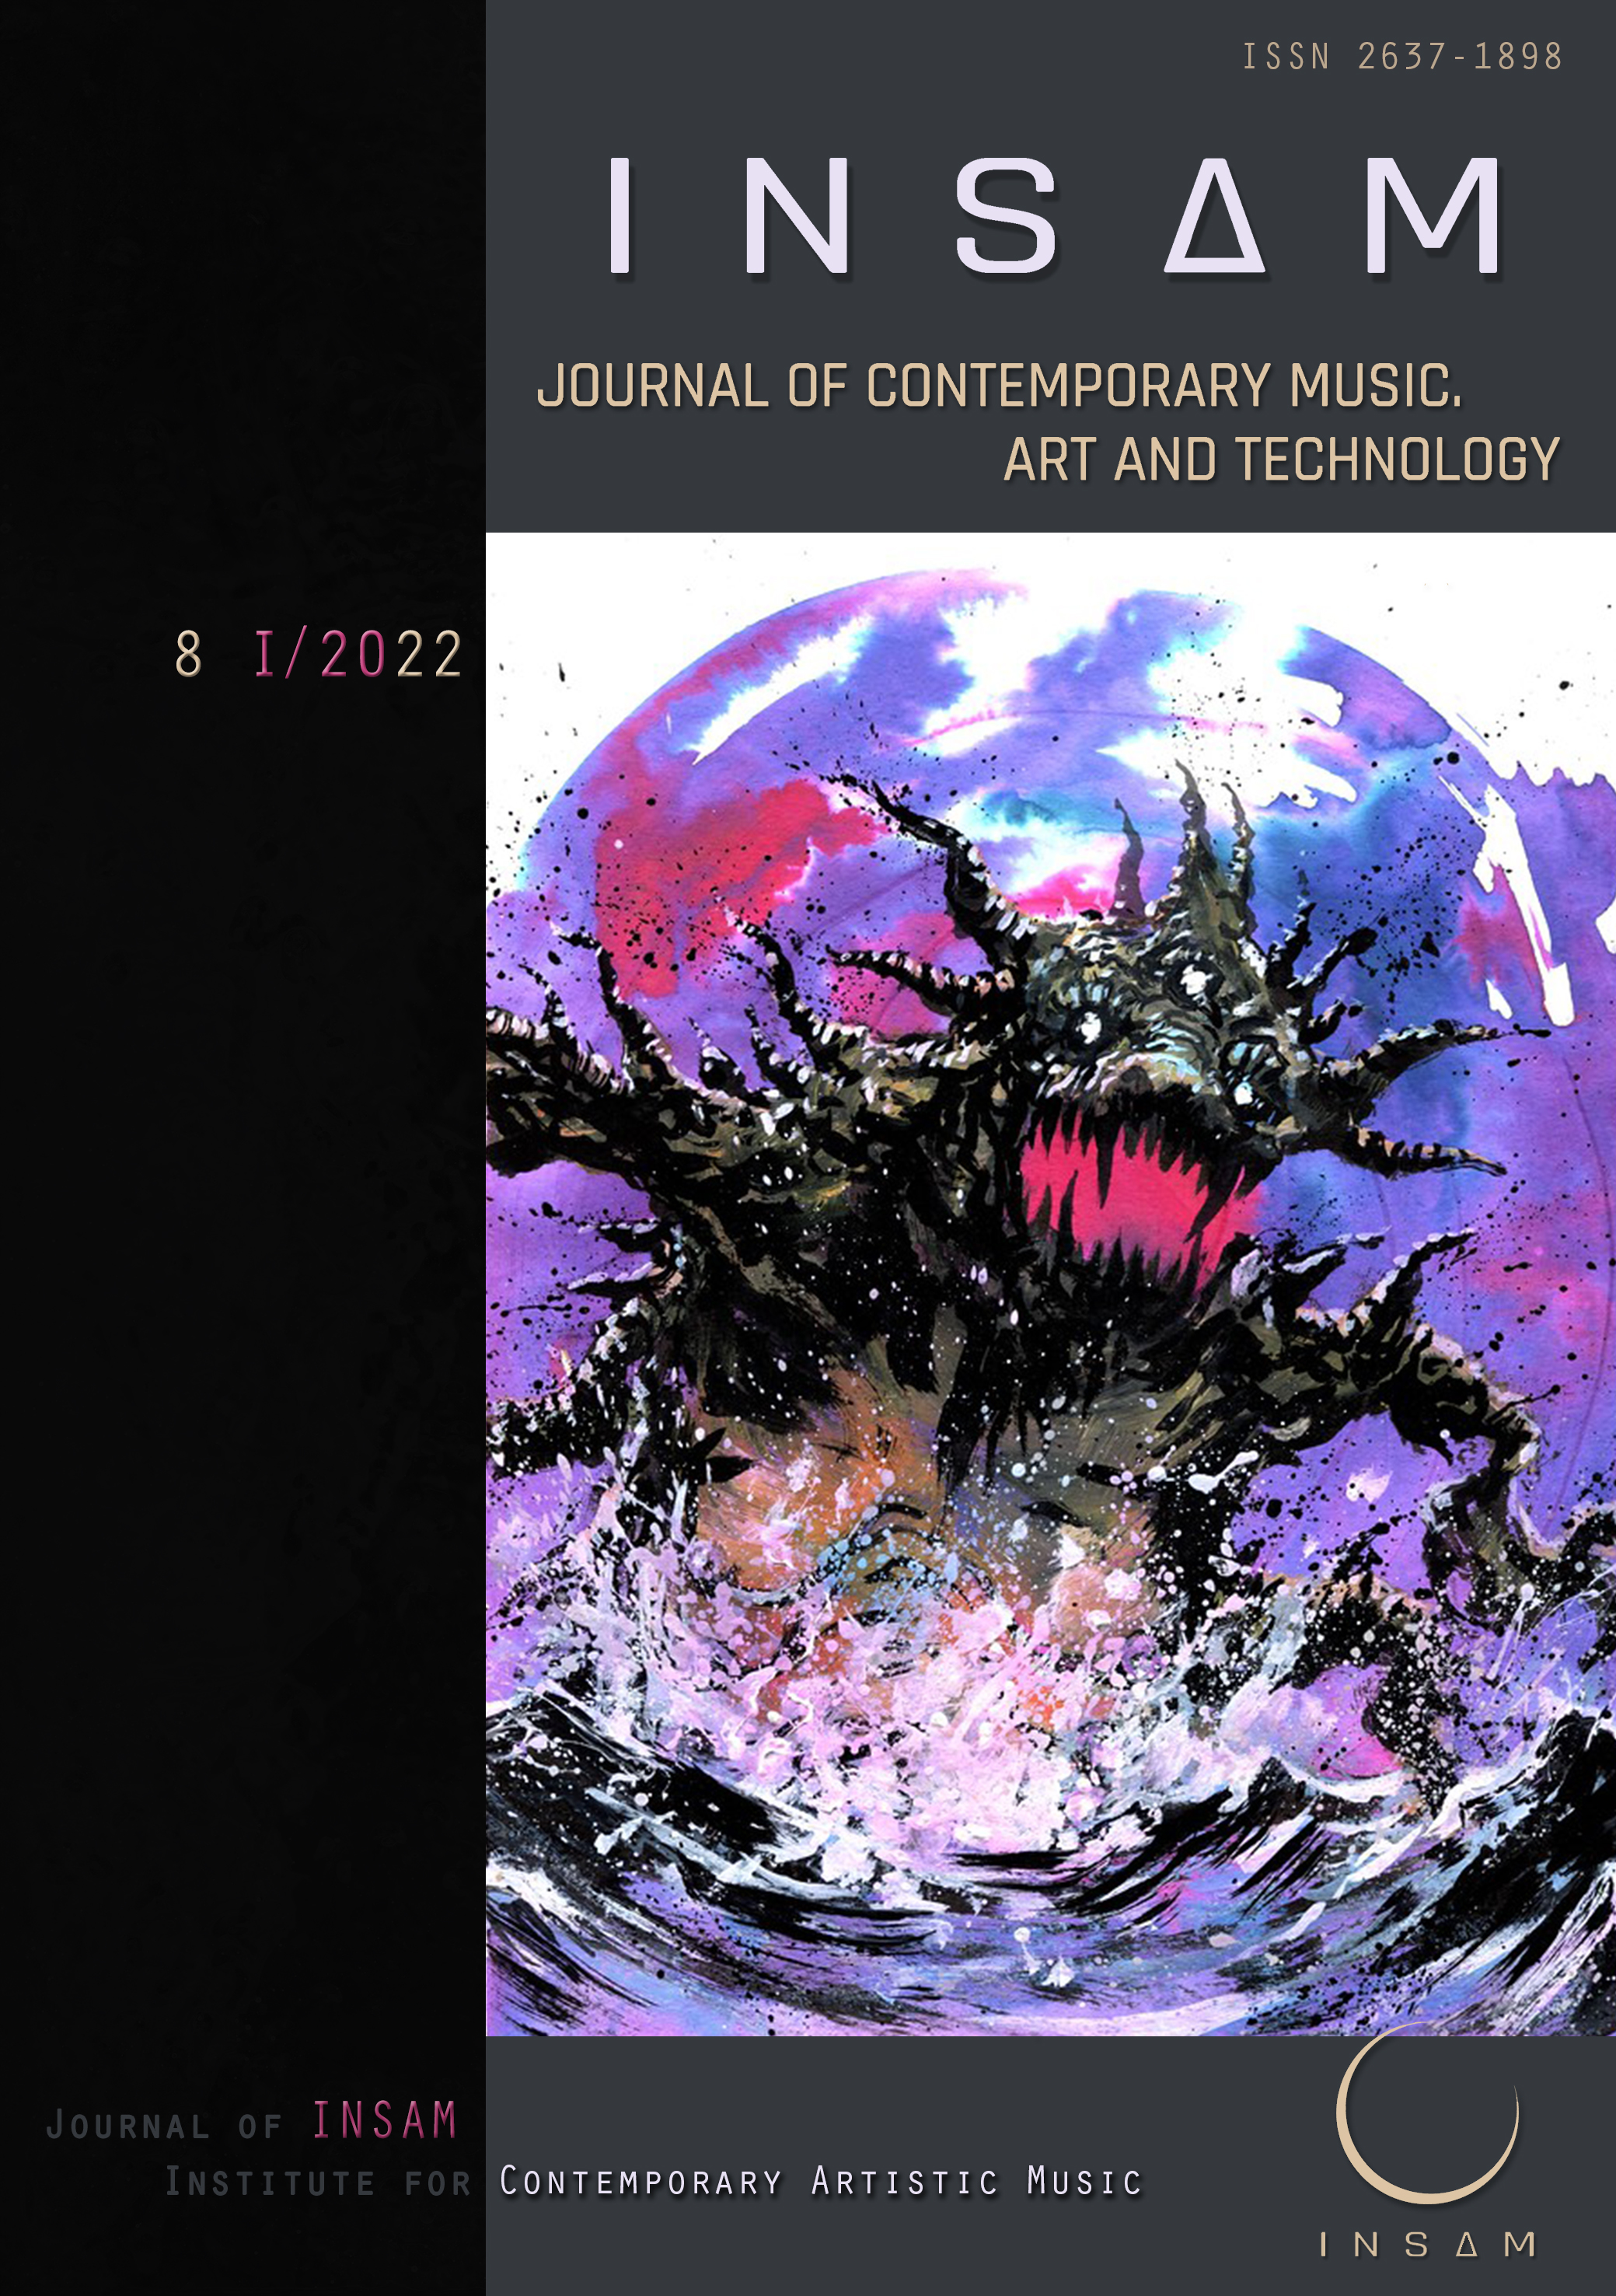 Cover of the INSAM Journal no. 8